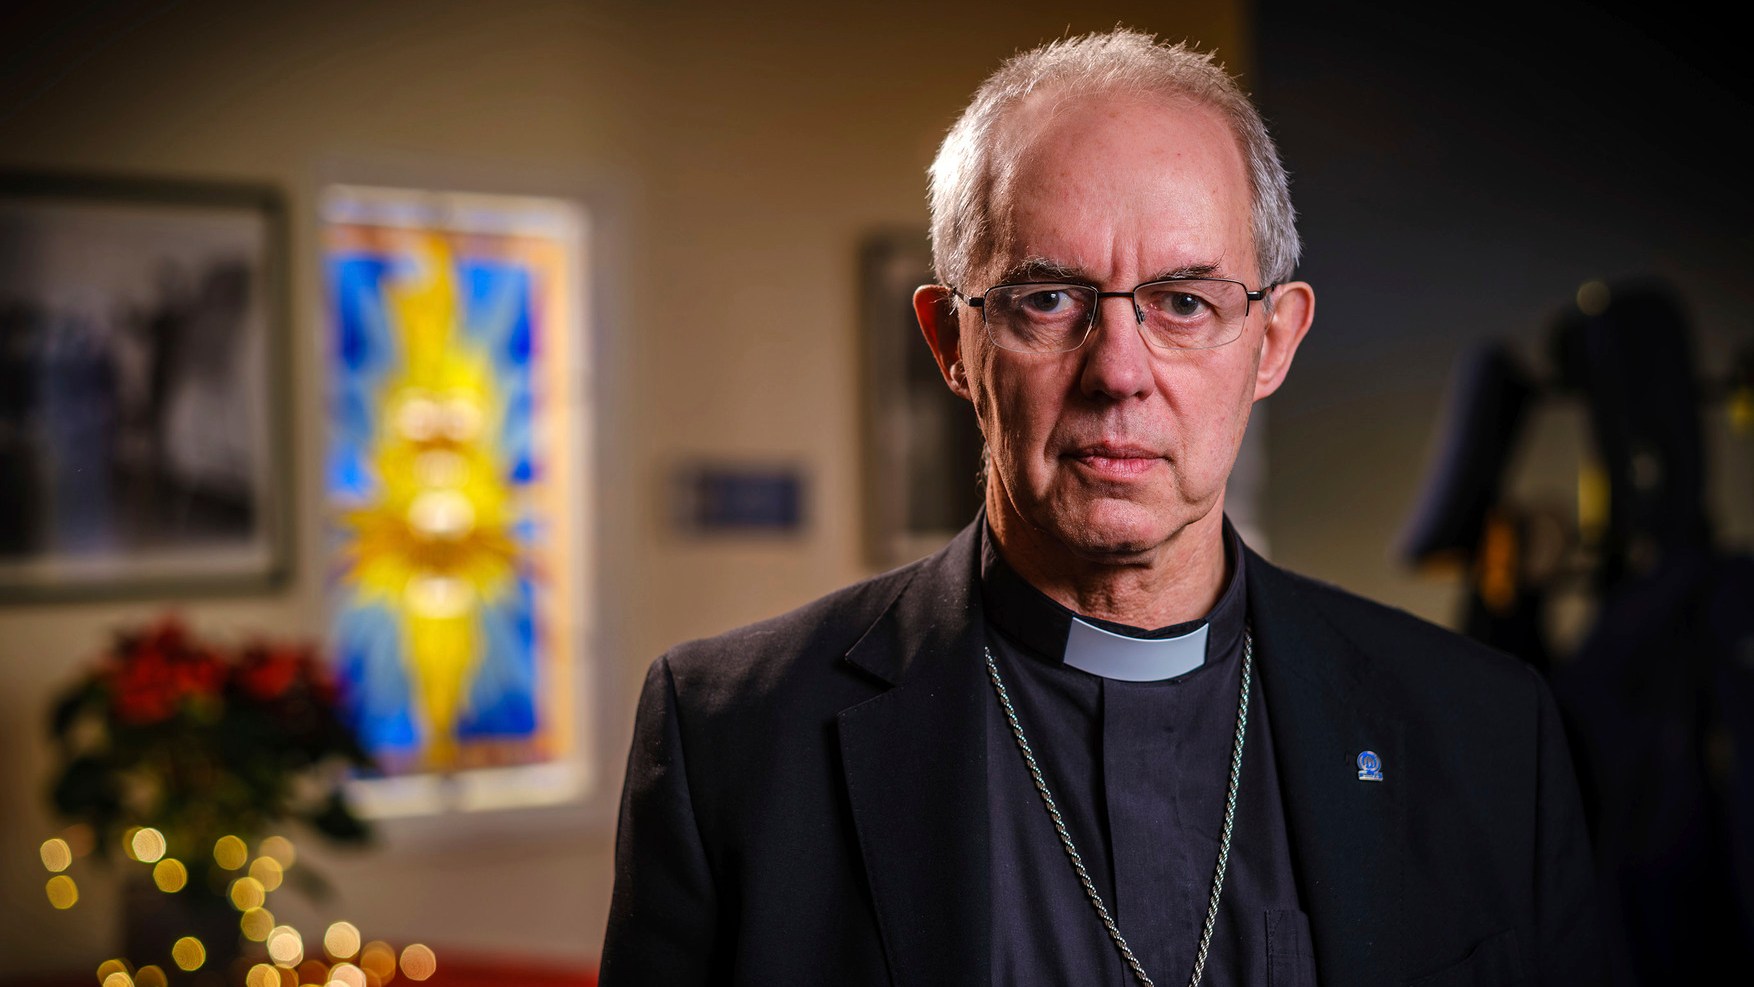 Justin Welby: My mother was an alcoholic. Here’s why I forgave her as she died